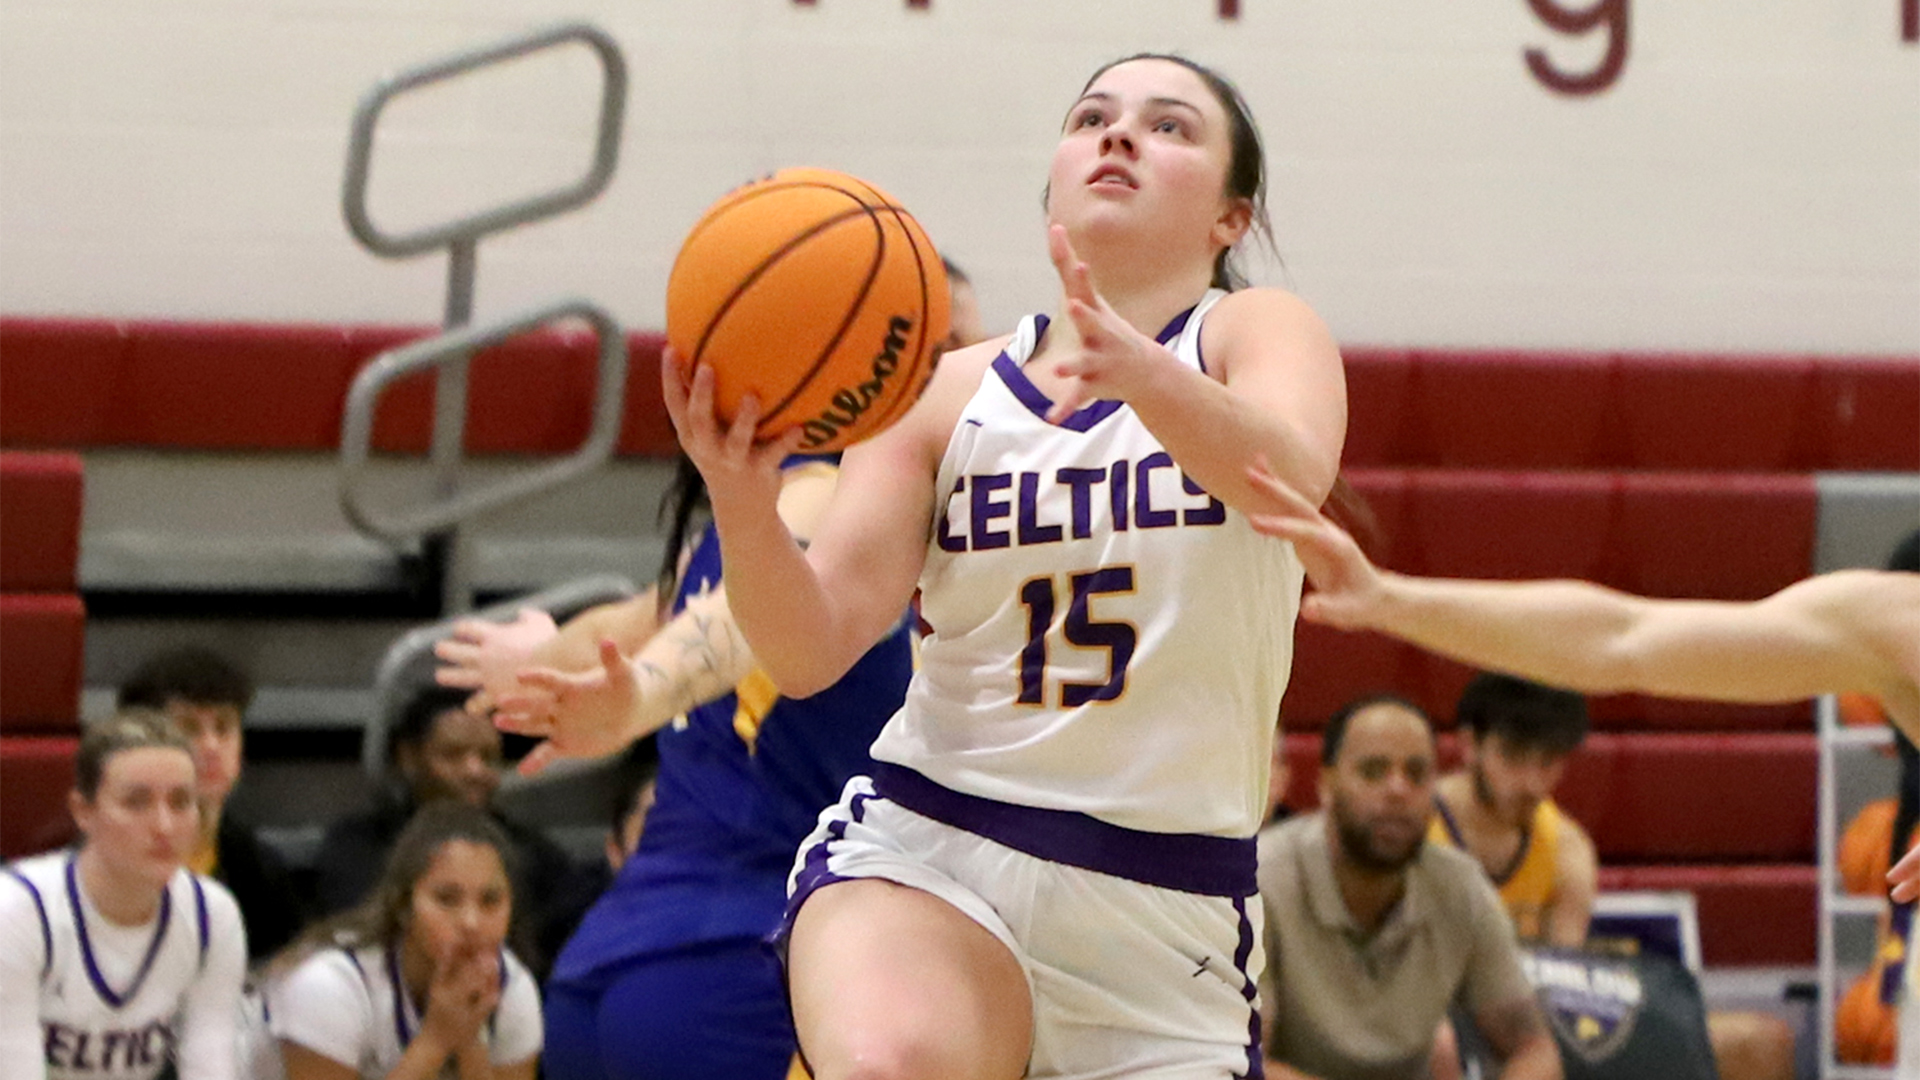 Emiley Hillgartner led the Celtics with a game-high 22 points. Photo by Robert Cifone.